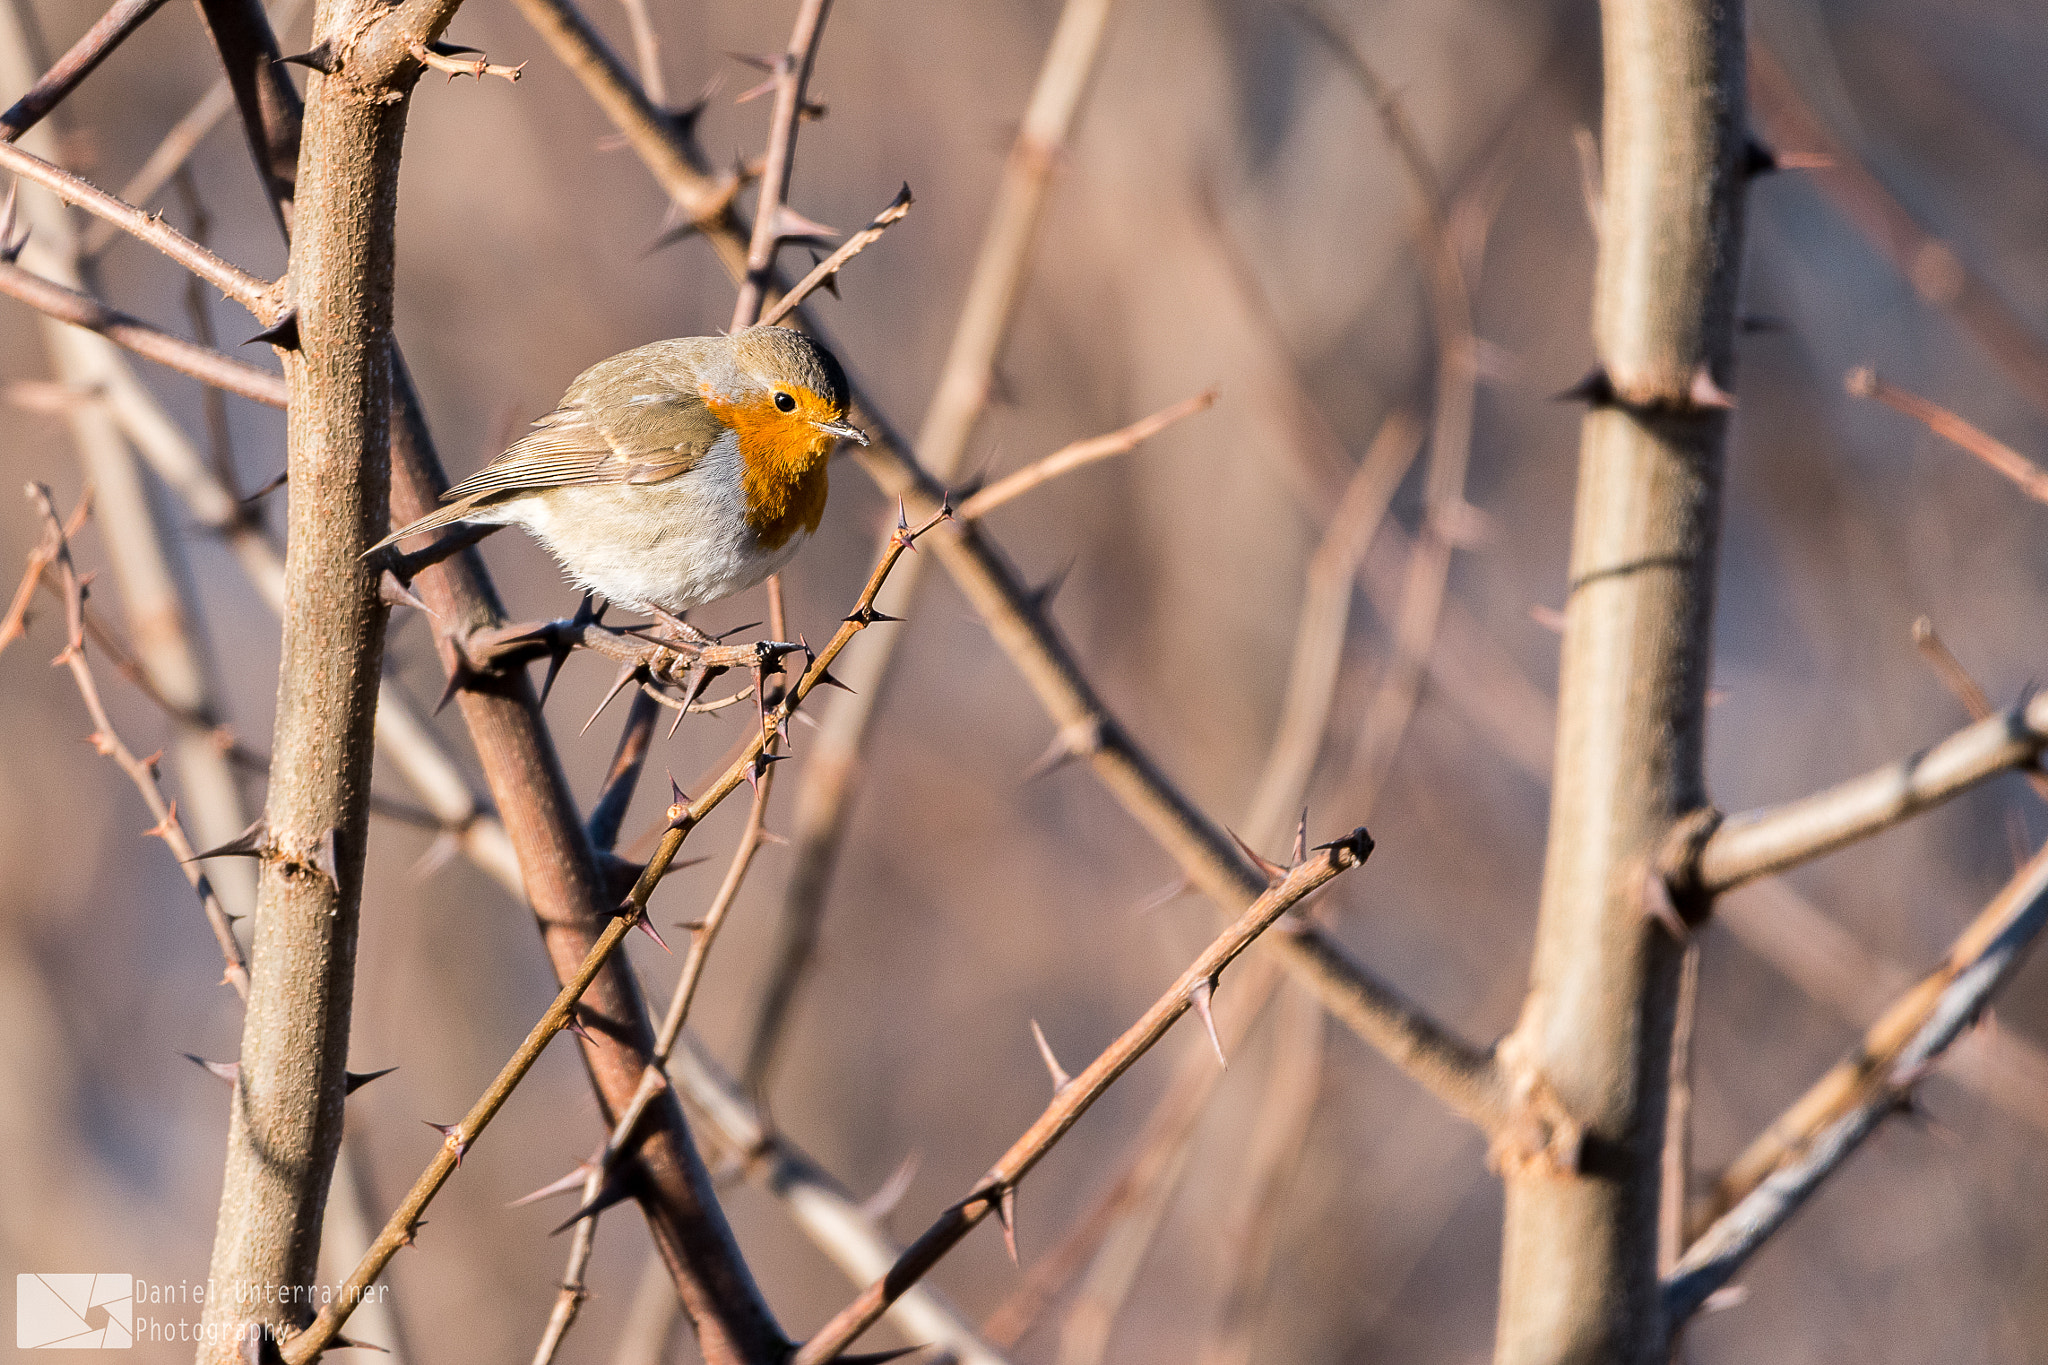 Nikon D5500 + Sigma 150-600mm F5-6.3 DG OS HSM | C sample photo. A robin in the early morning sun photography